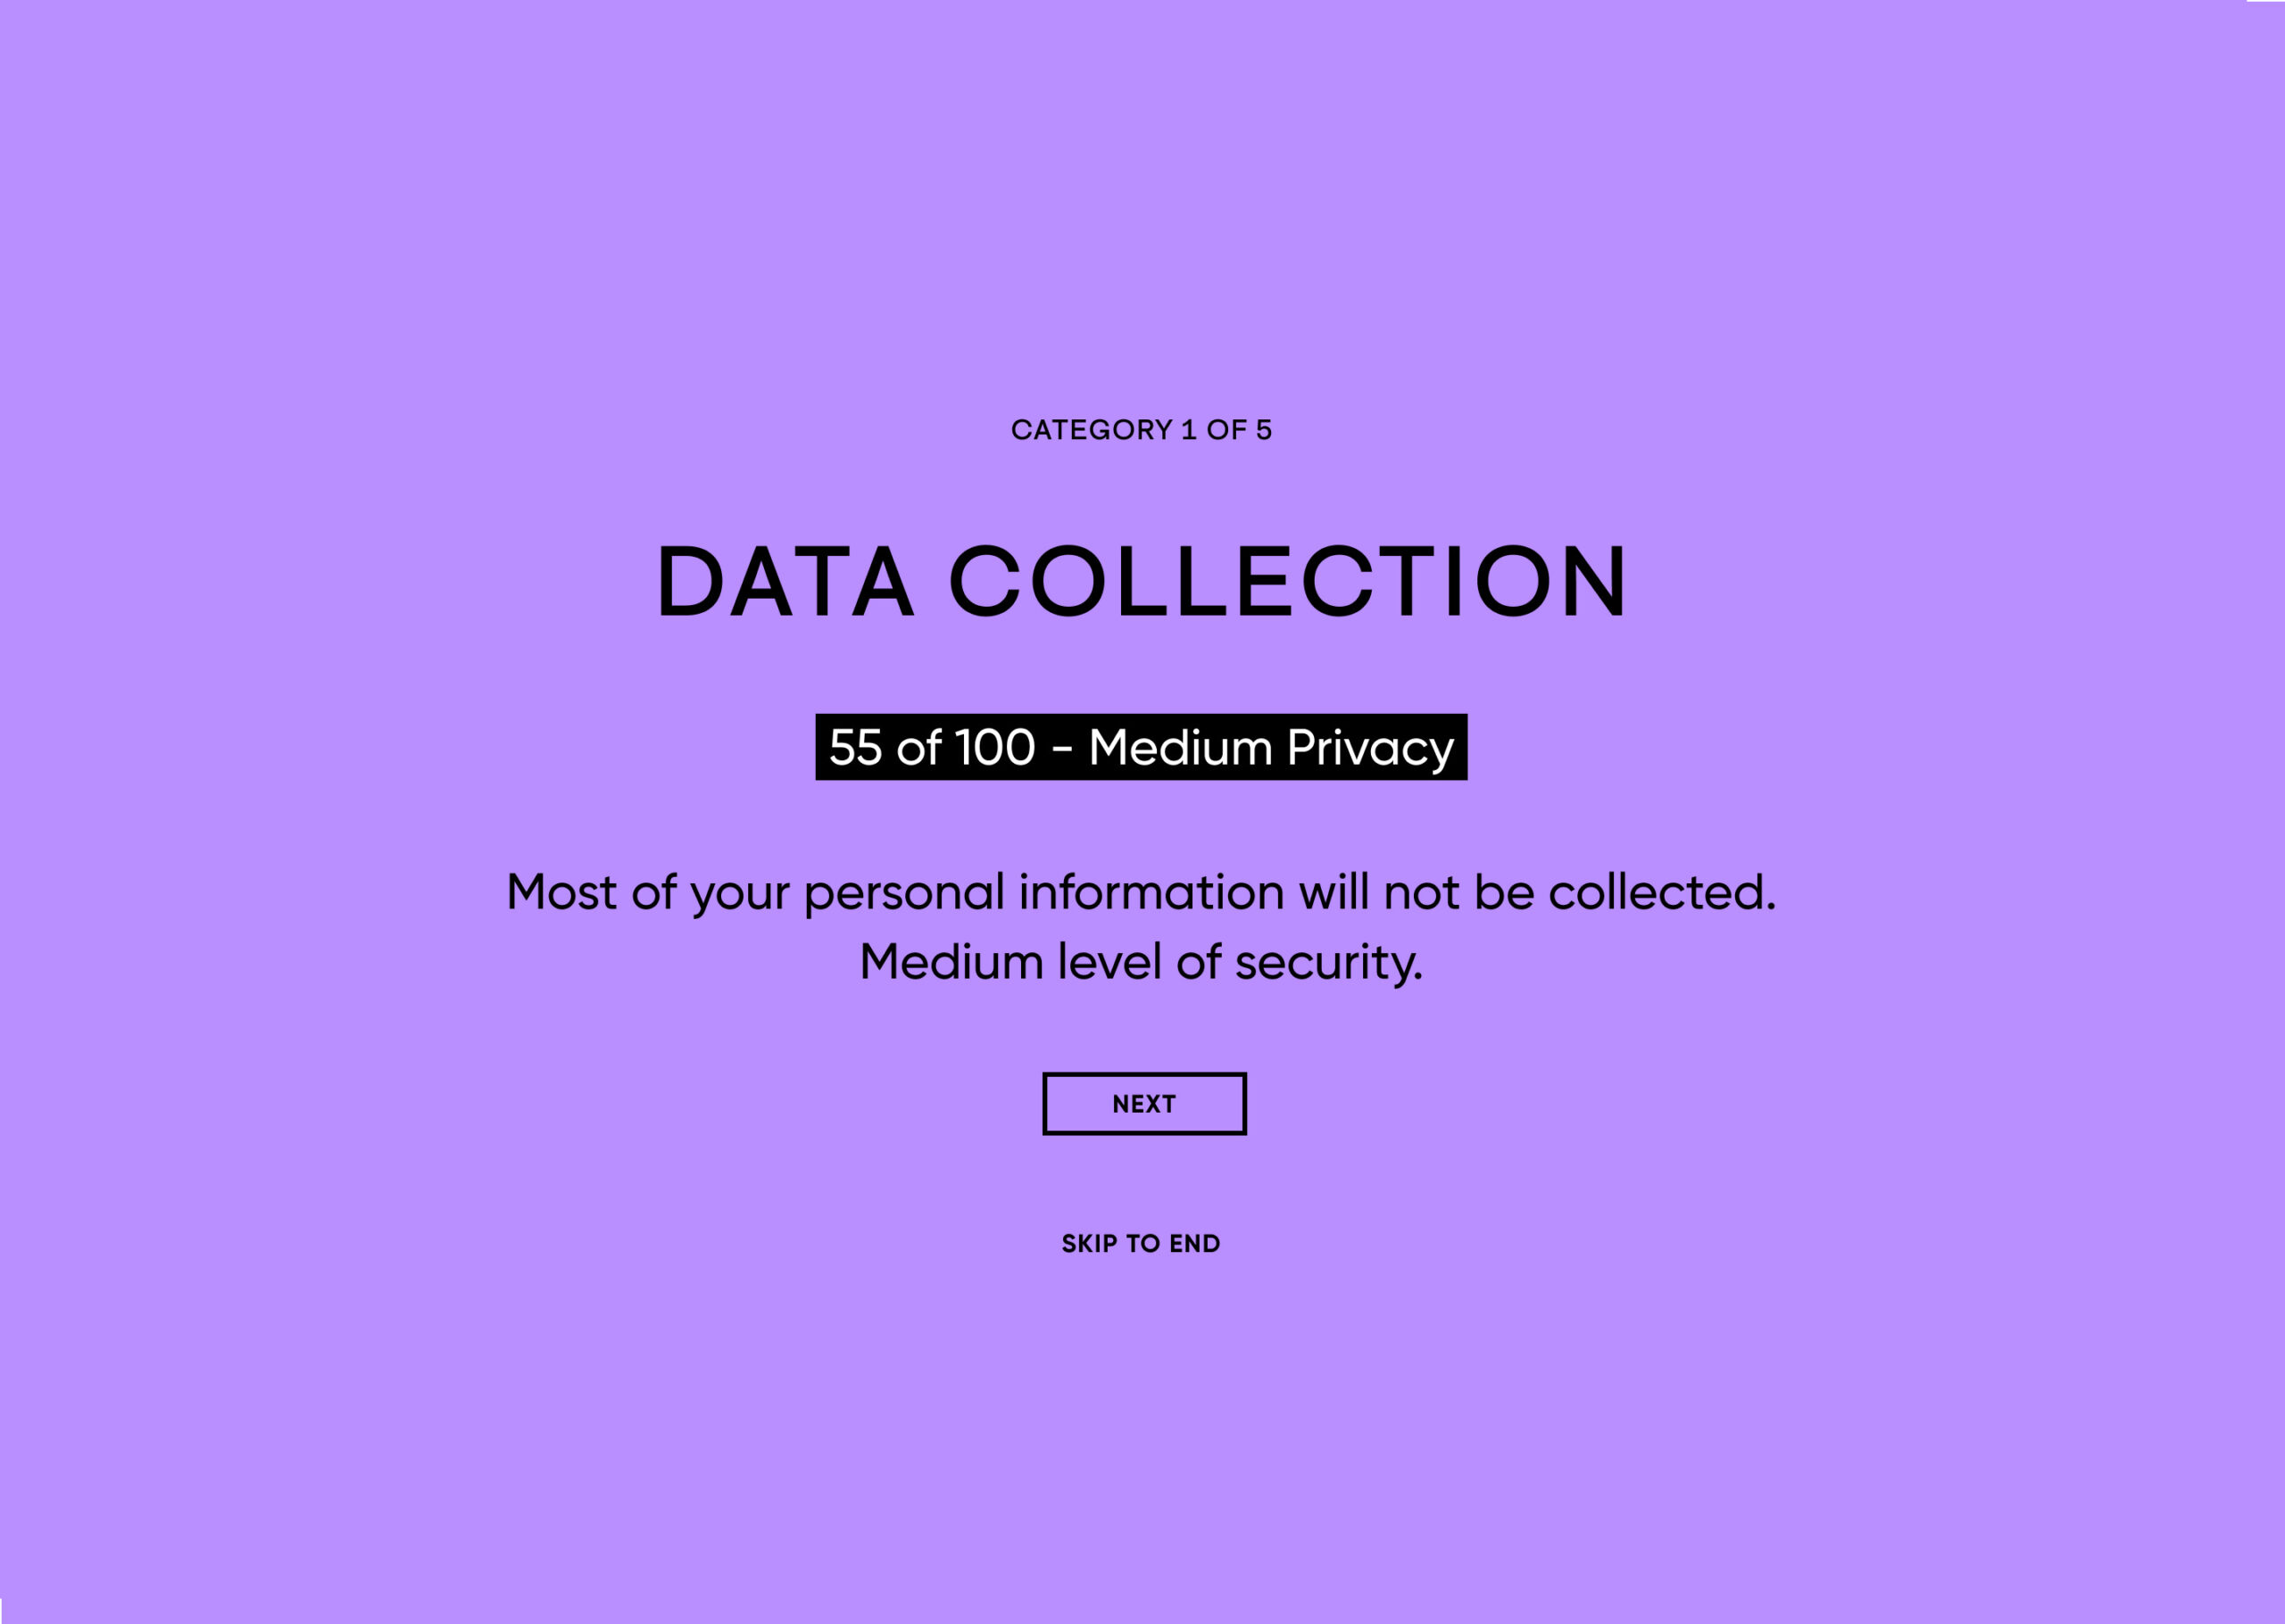 1 – Data Collection